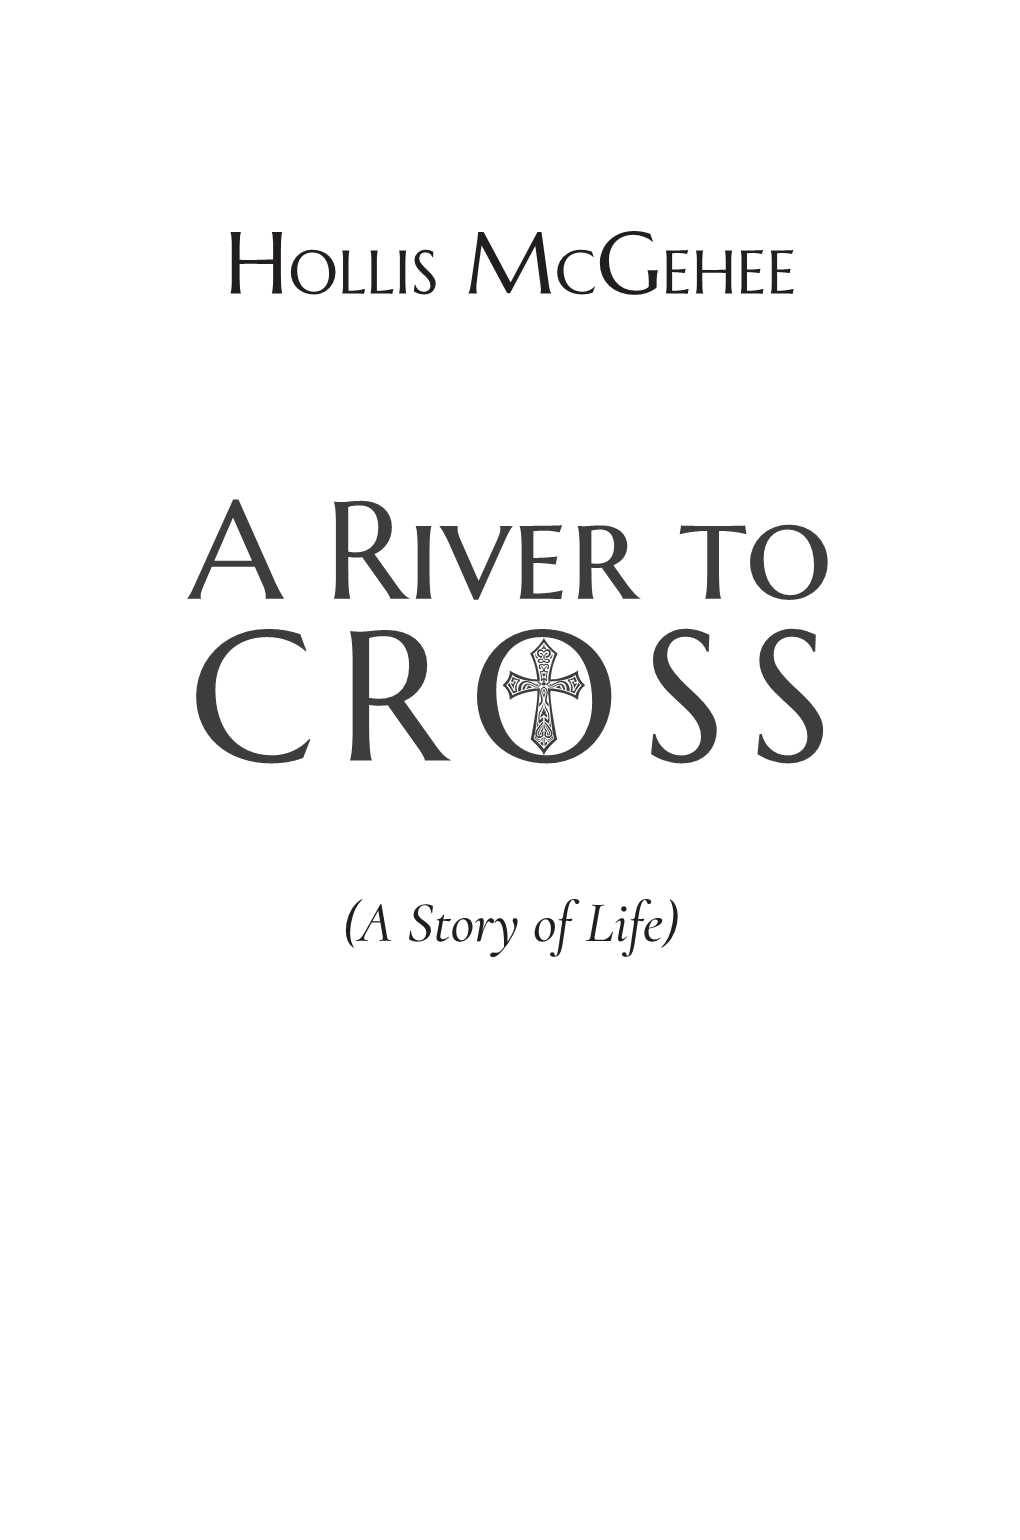 A River to CROSS